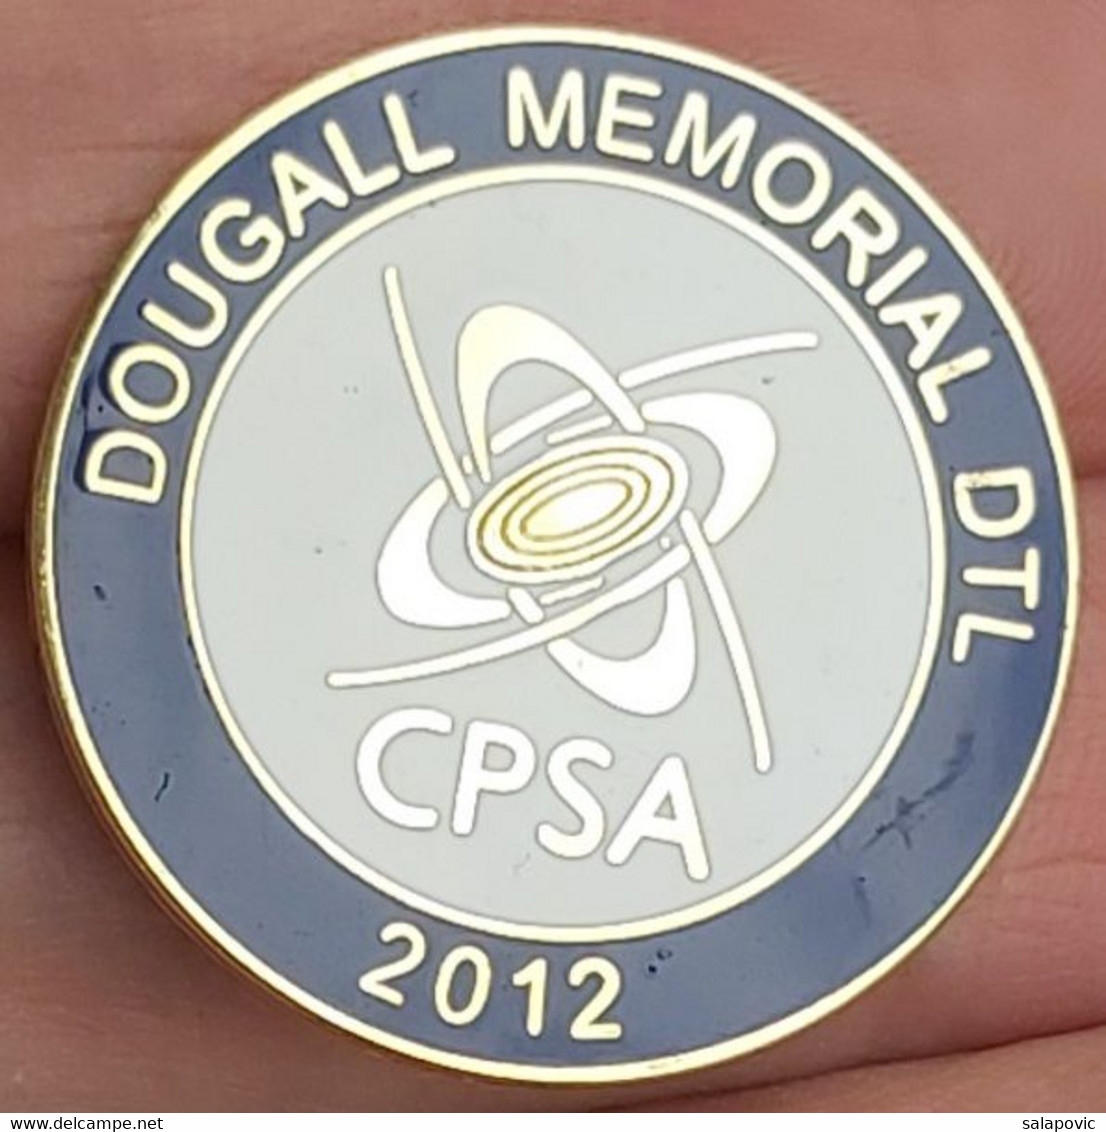 DOUGALL MEMORIAL DTL (CPSA) Clay Pigeon Shooting Association 2012 Archery Shooting PINS BADGES A5/4 - Archery